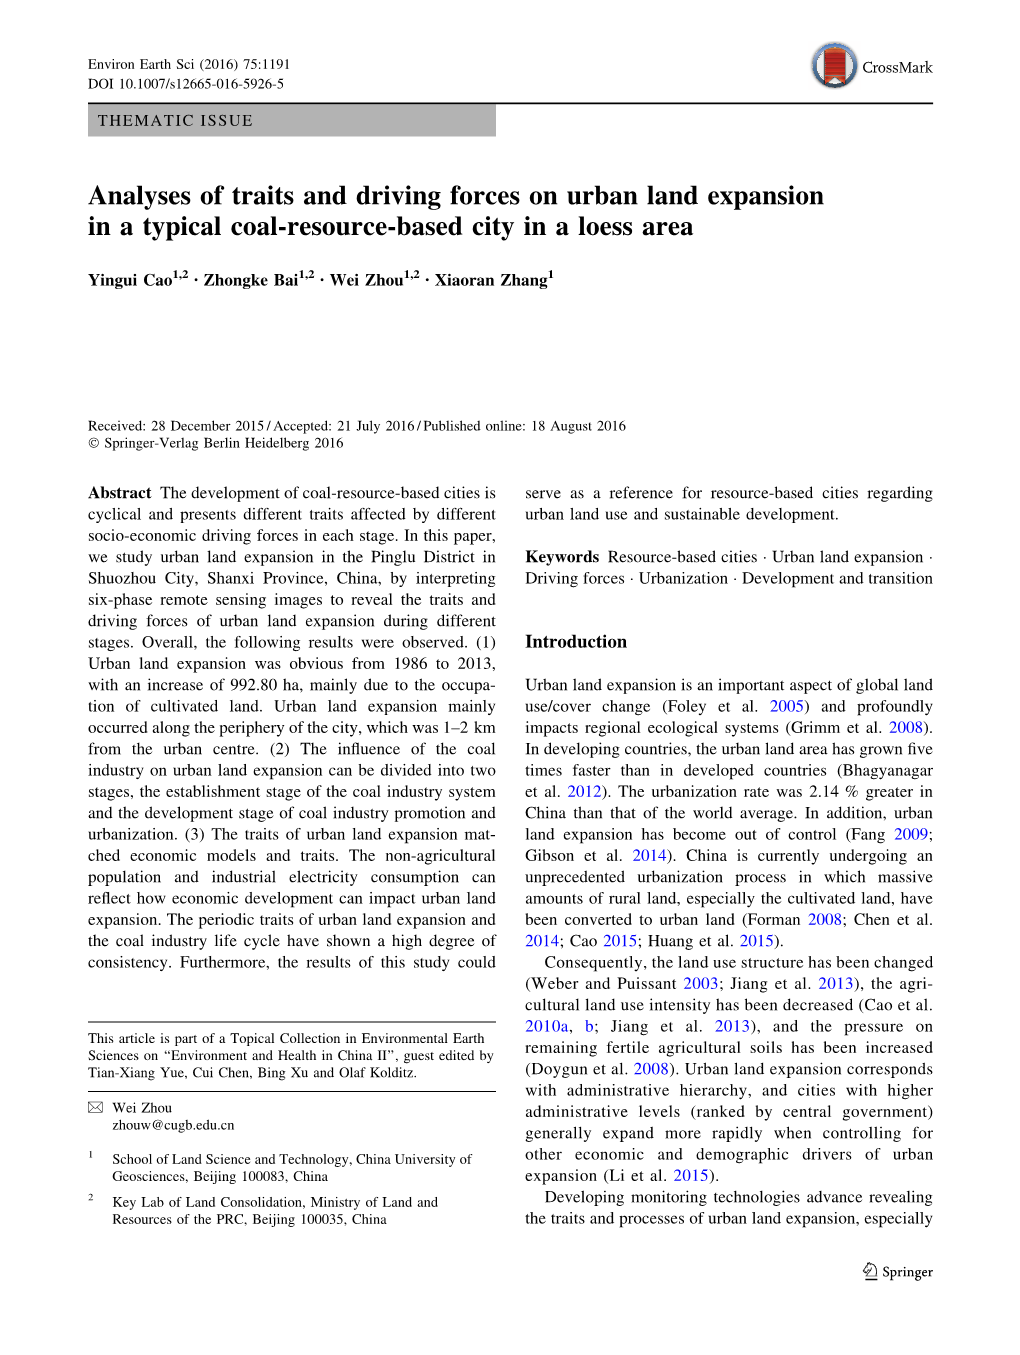 Analyses of Traits and Driving Forces on Urban Land Expansion in a Typical Coal-Resource-Based City in a Loess Area